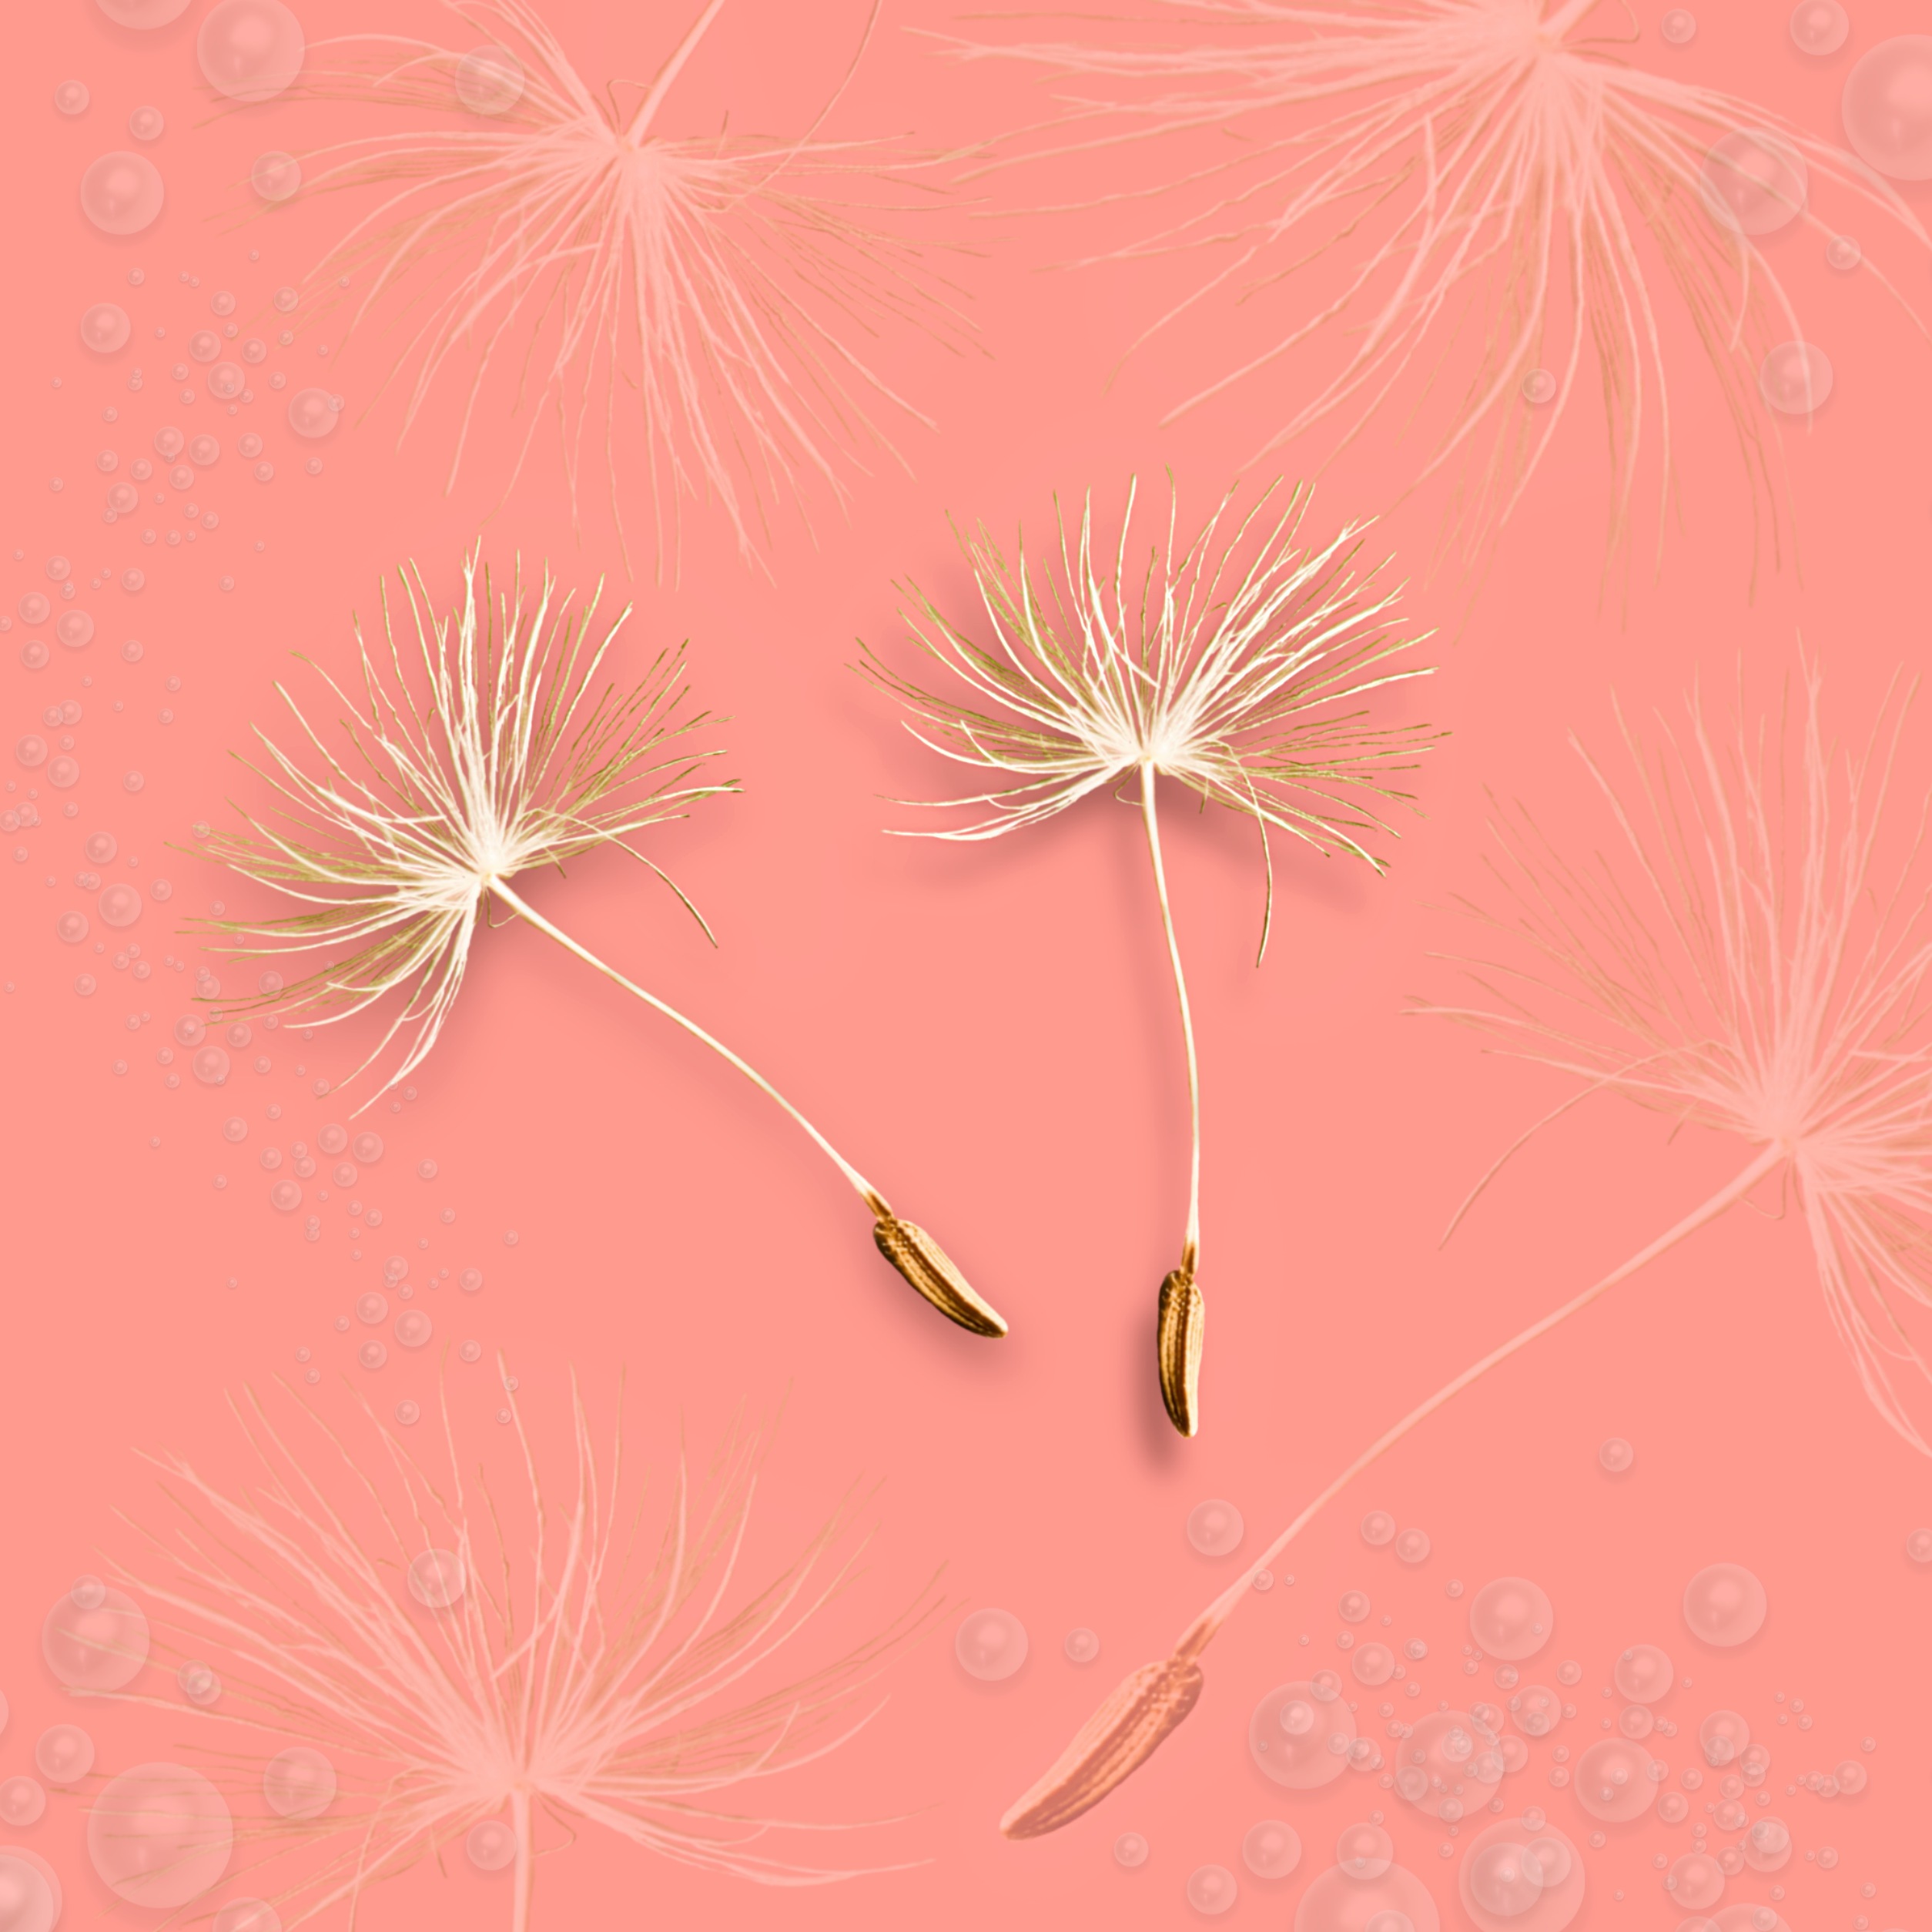 In love with my friend's photography @mrsorriso1747 🍃💛#wishes #dandelionseeds #coral #pastel #pearlbrushes #background #madewithpicsart #freetoedit 